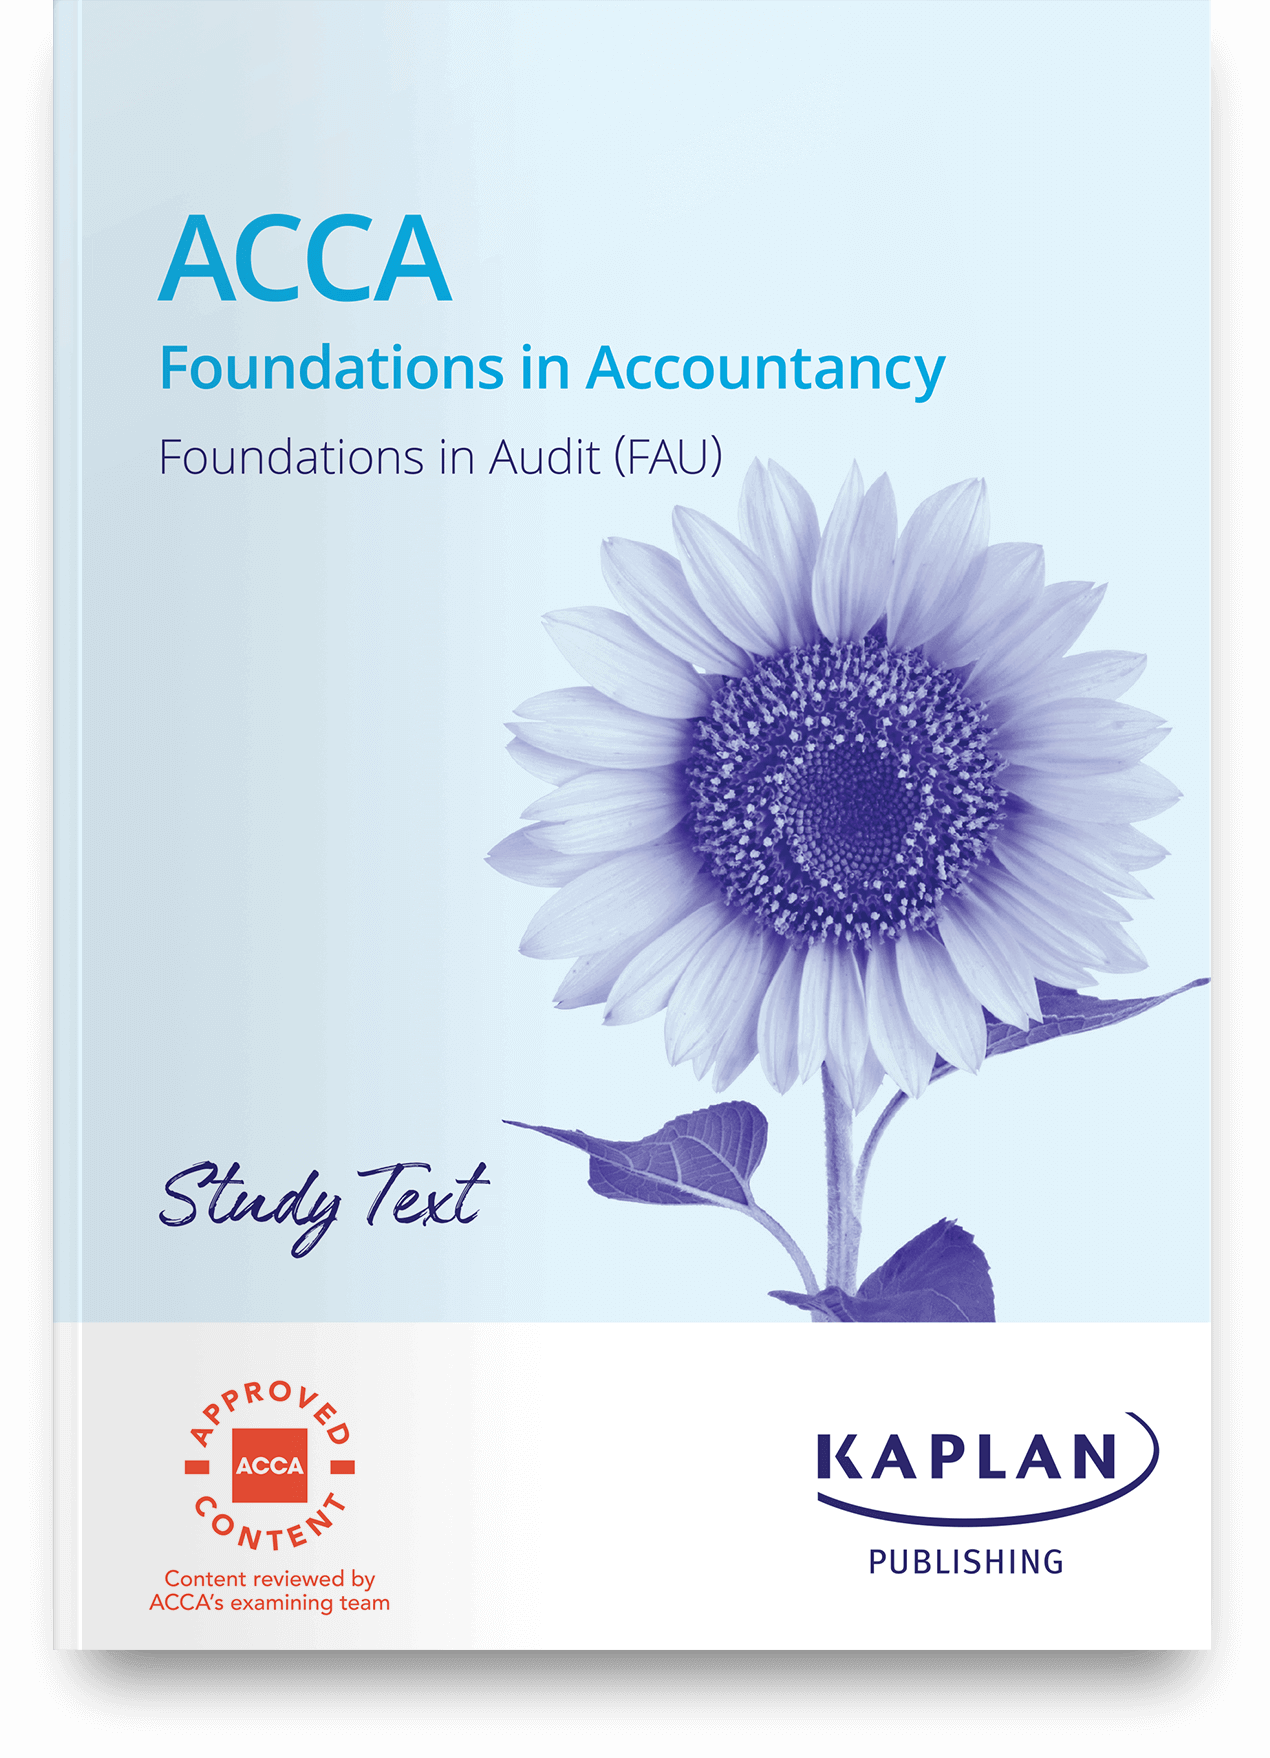 An image of the book for ACCA Foundations - Foundations in Audit (FAU) - Study Text